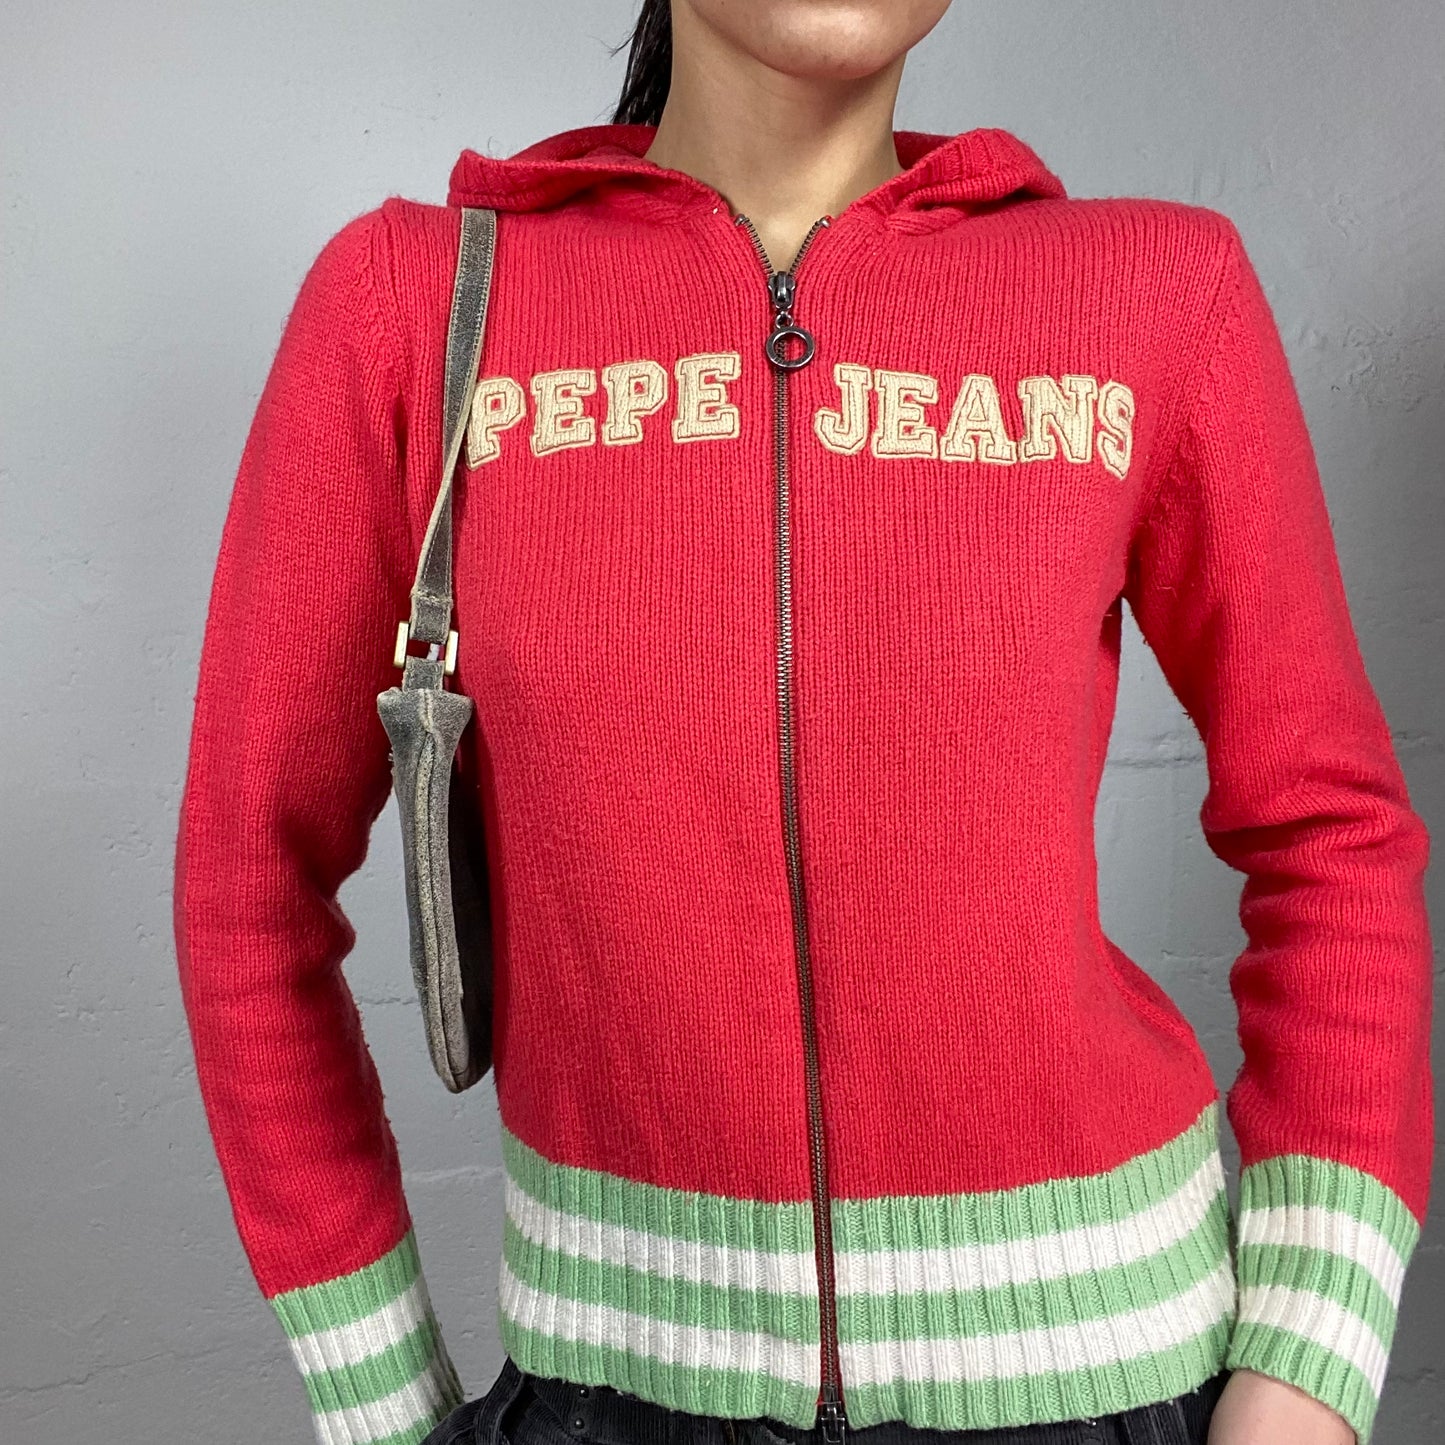 Vintage 2000's Pepe Jeans Sporty Red Knitted Zip Up Sweater with White Brand Print (M)